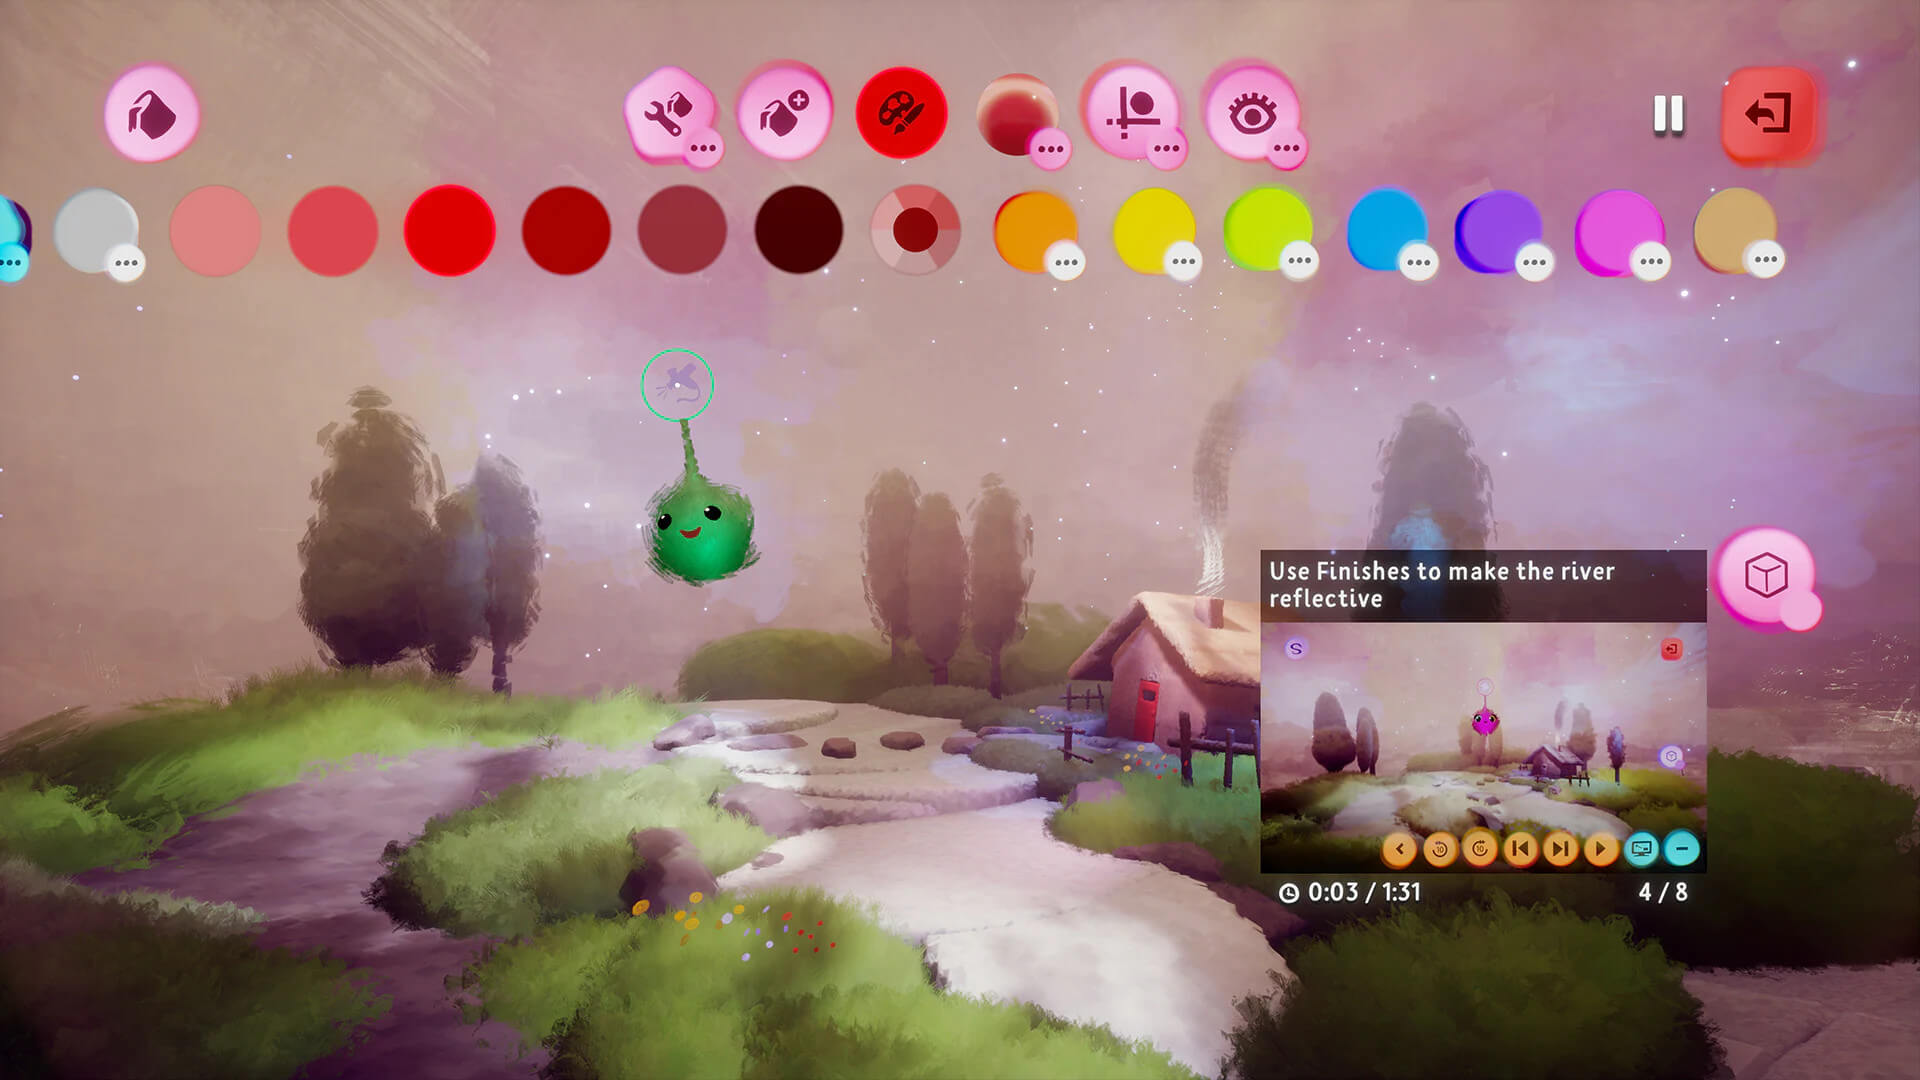 The player creating a pictorial scene with the Dreams editor